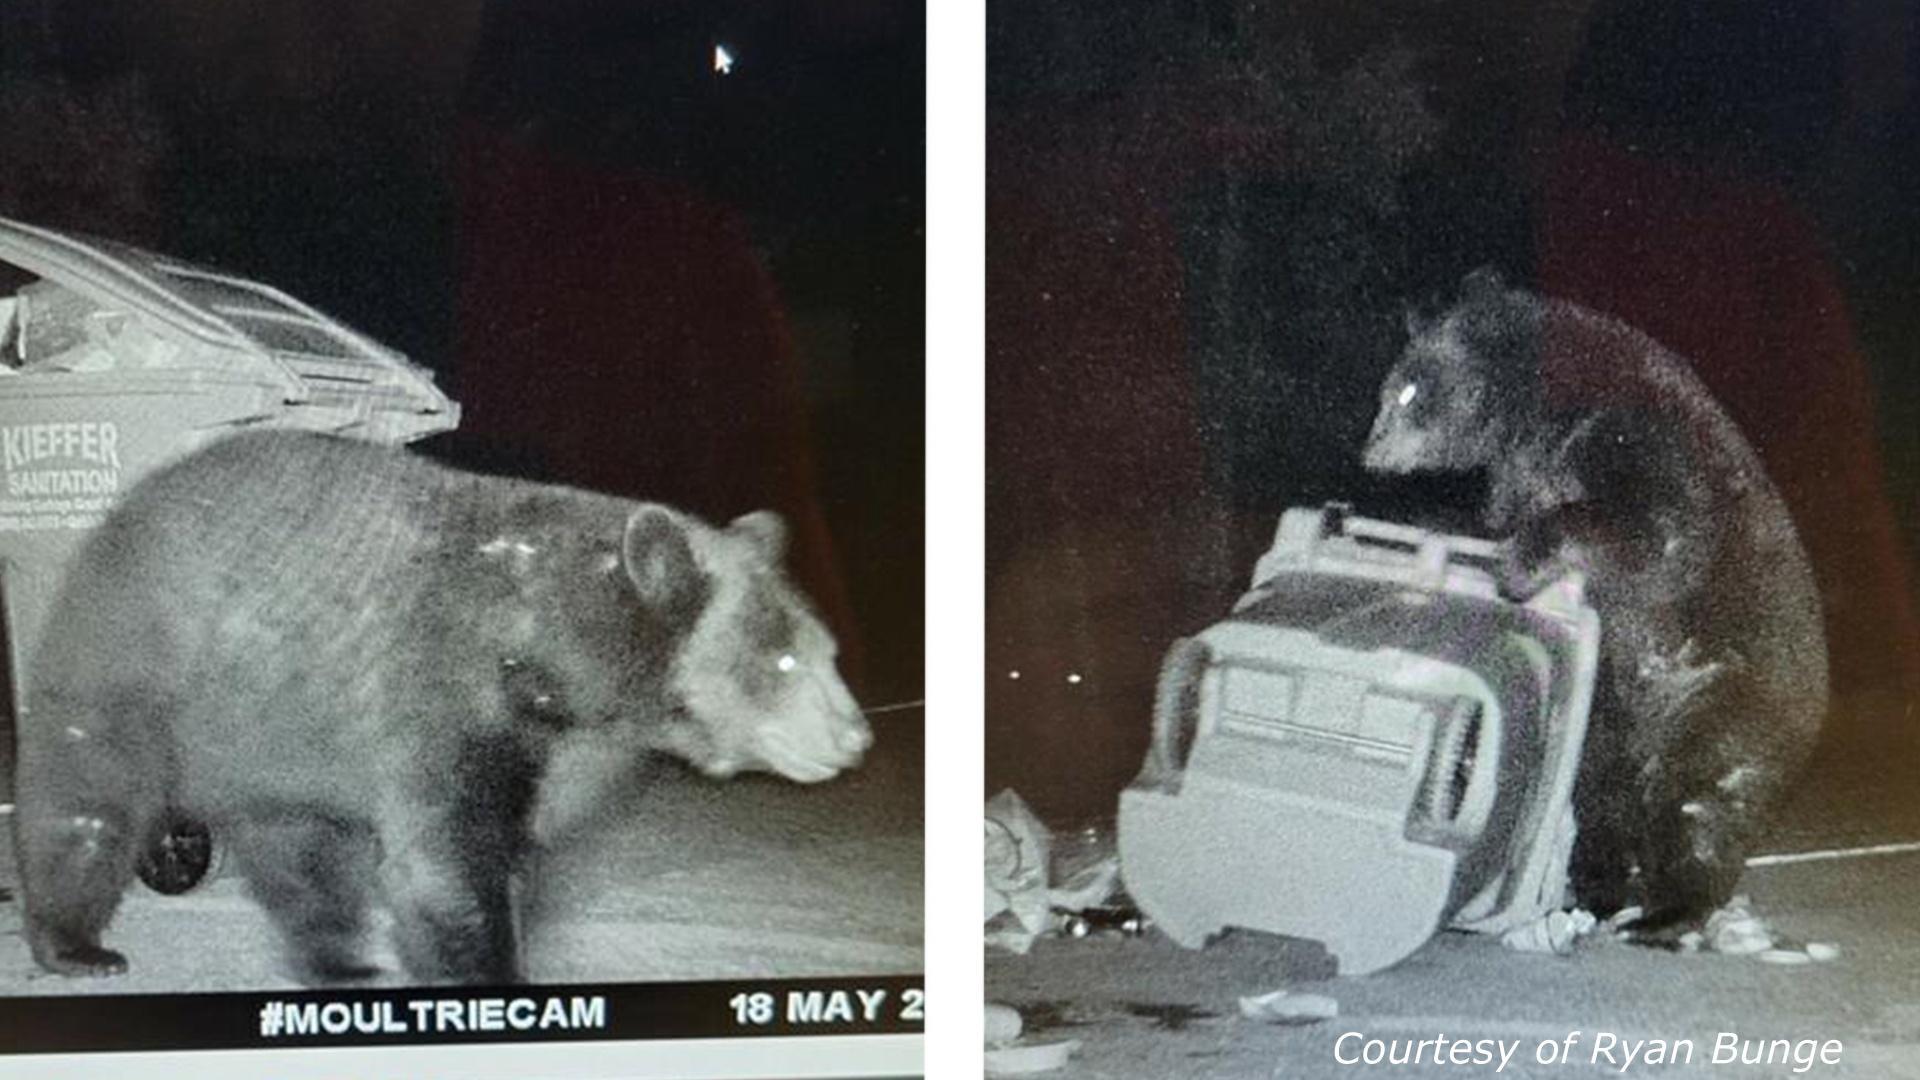 Two images, one of a bear walking next to a garbage can and the other of a bear tipping a garbage can over. 